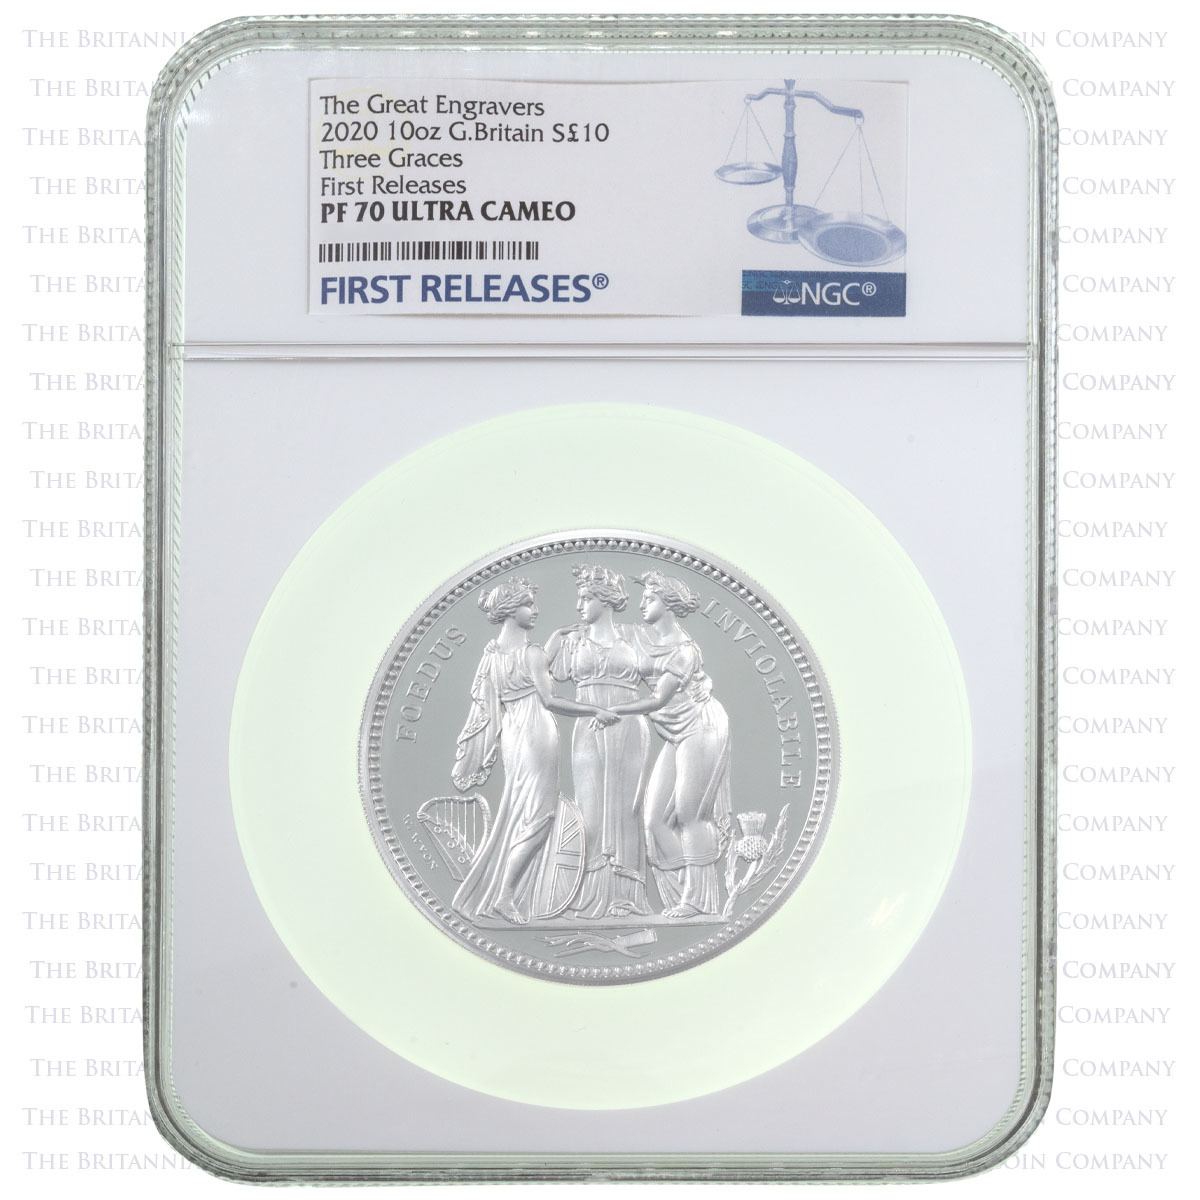 UK20WW10S 2020 Great Engravers Three Graces Ten Ounce Silver Proof Coin NGC Graded PF 70 Ultra Cameo First Releases Holder